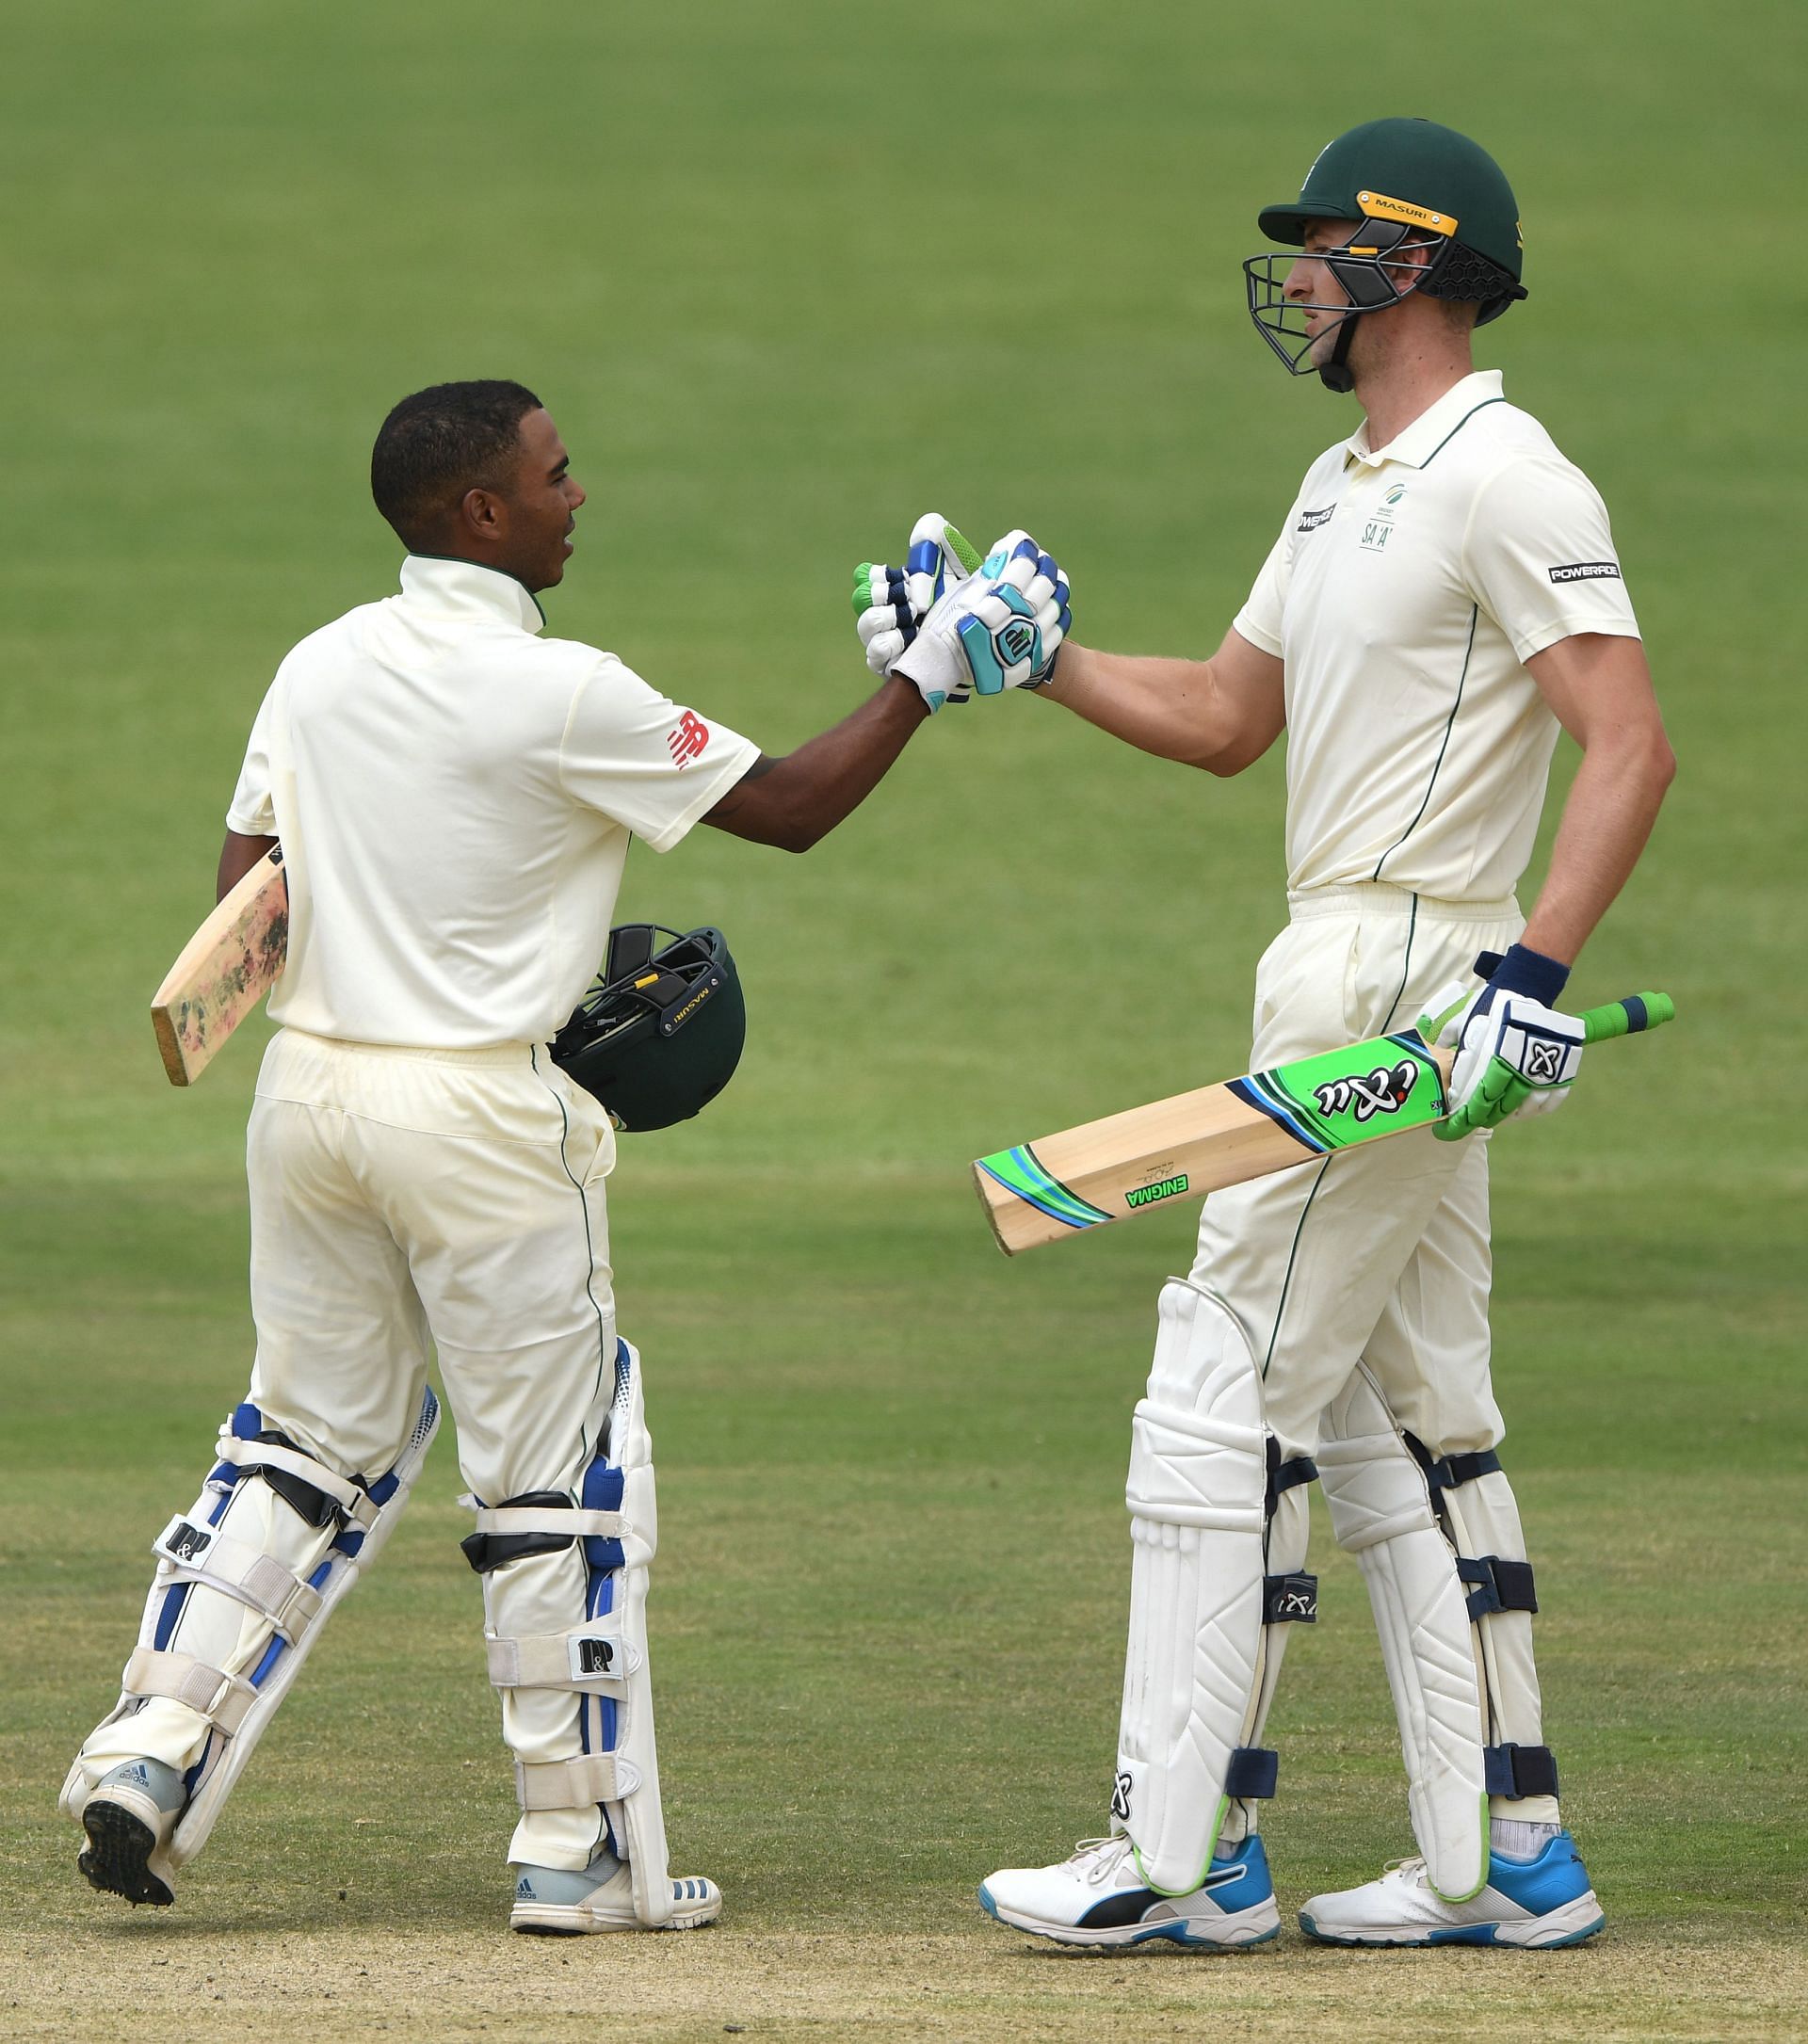 Neil Brand (right) will be leading South Africa in this series.